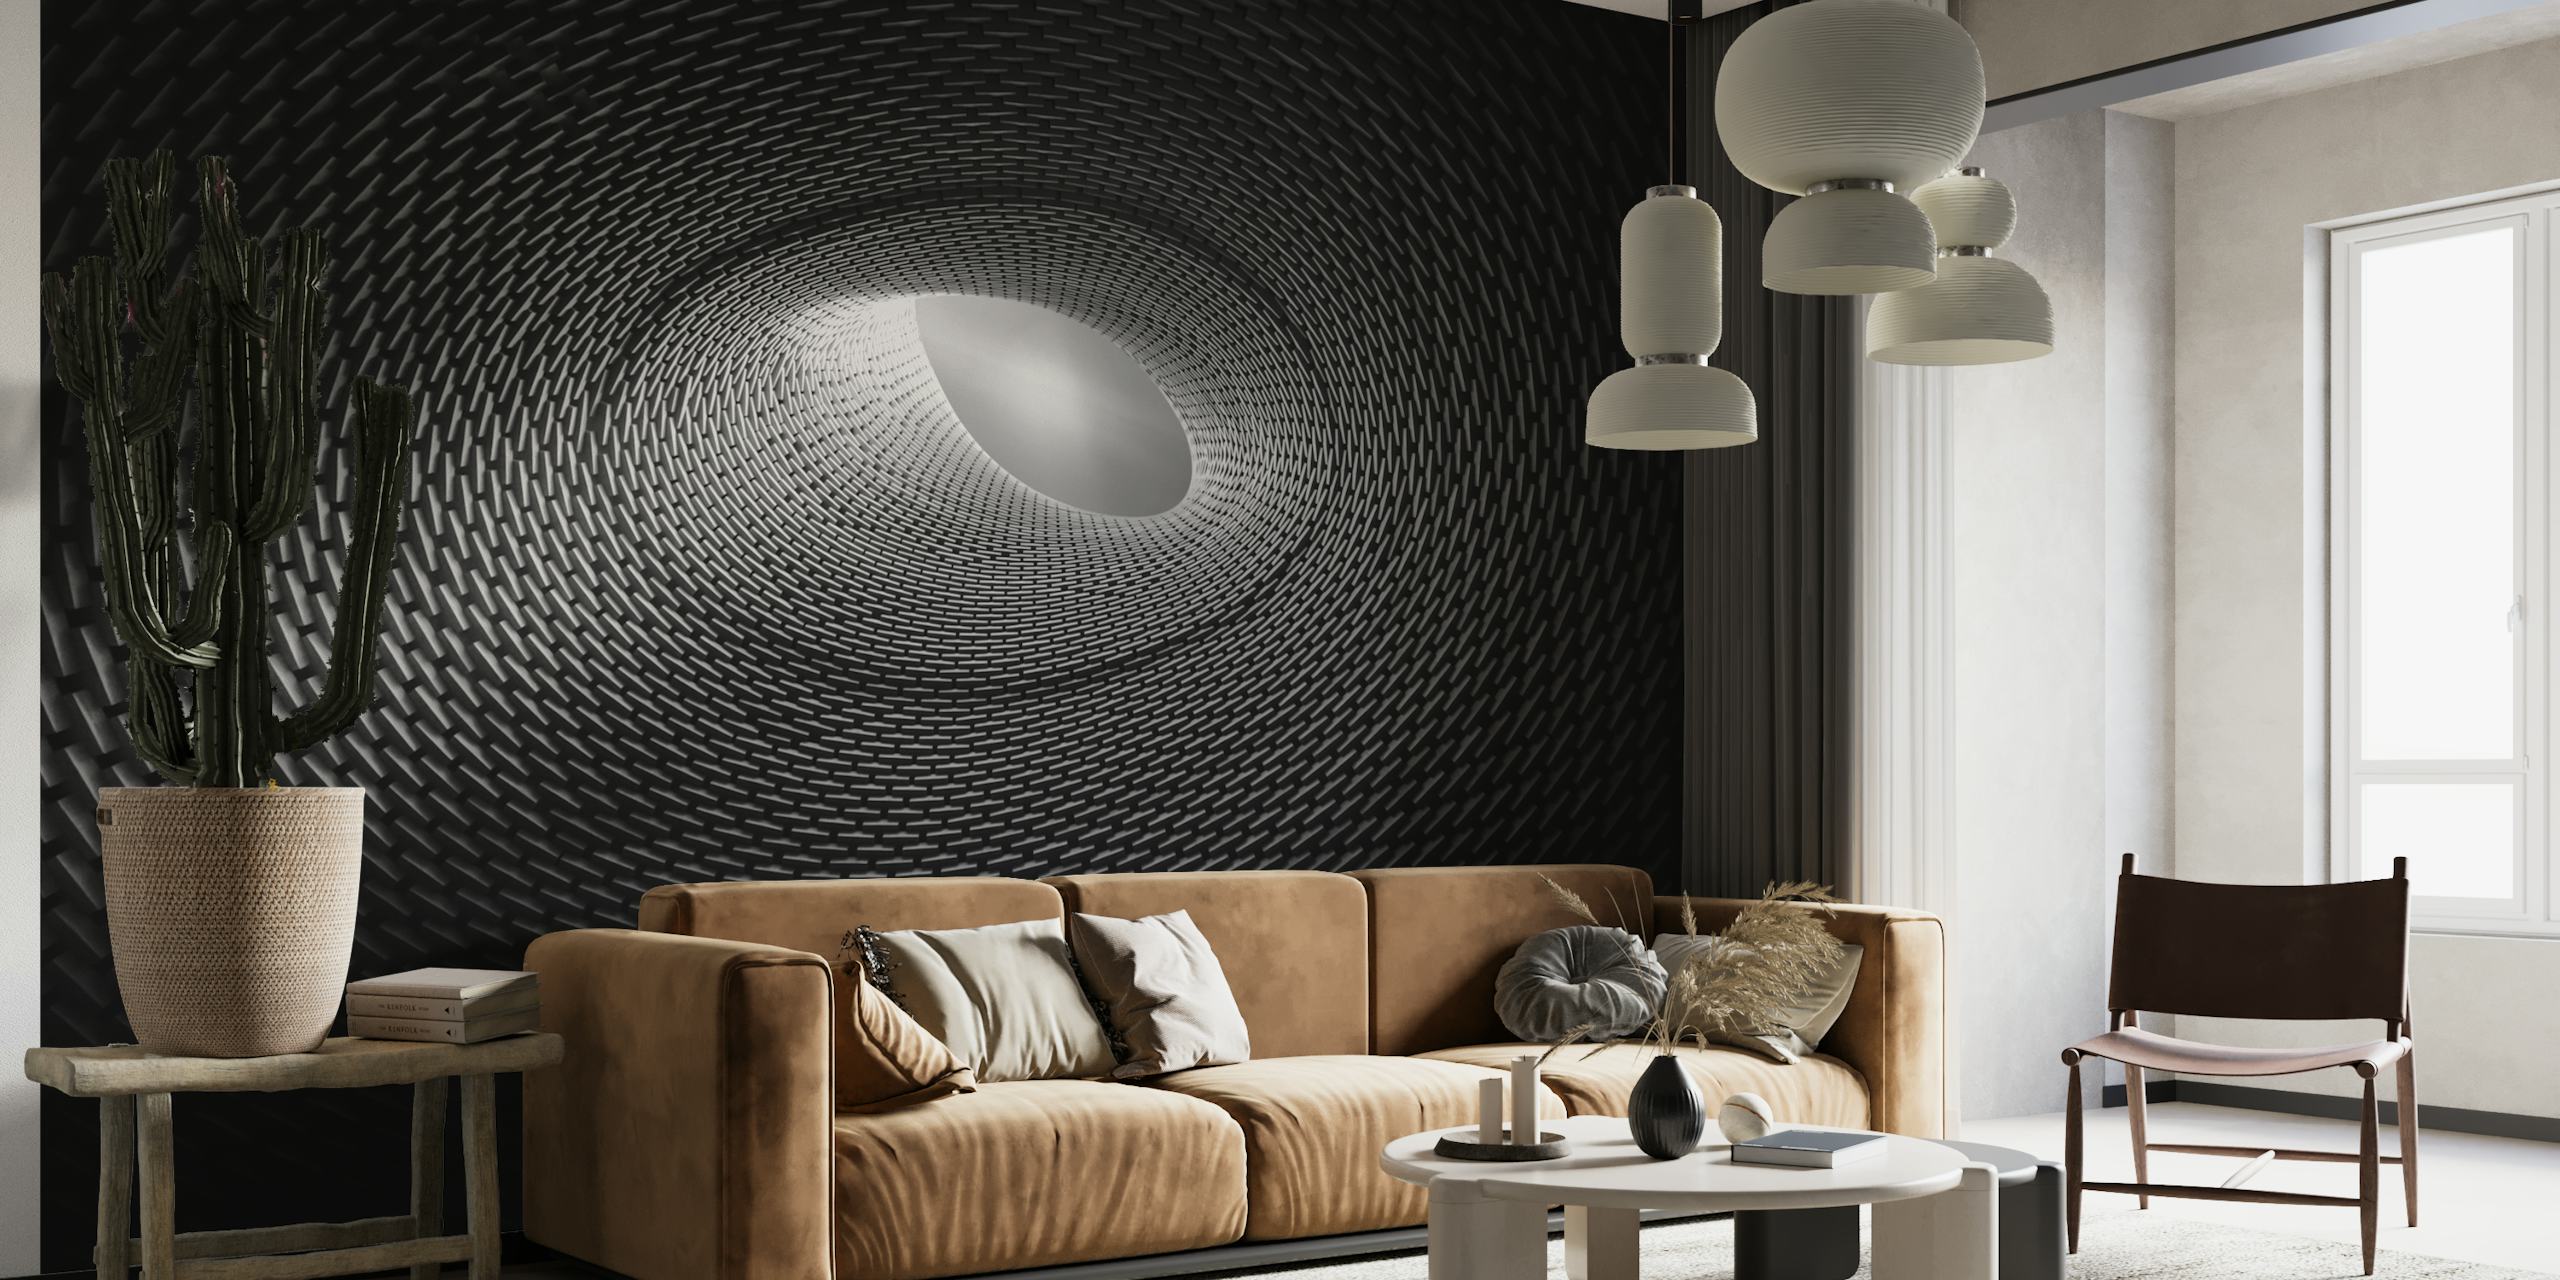 Abstract black and white NYC-inspired wall mural design